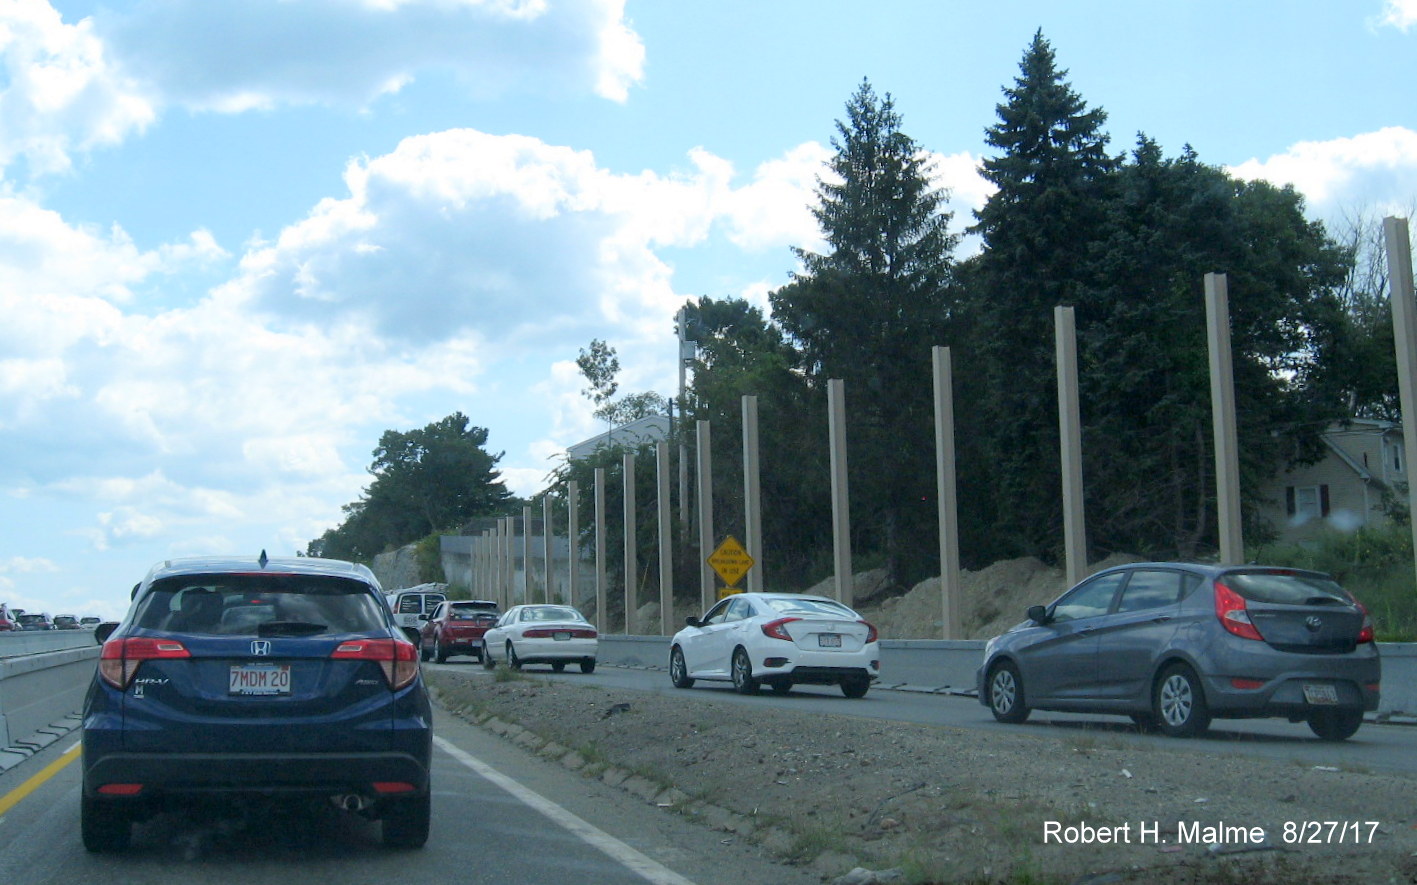 Image of traffic merging from MA 9 onto I-95 South in Add-A-Lane Project work zone in Wellesley